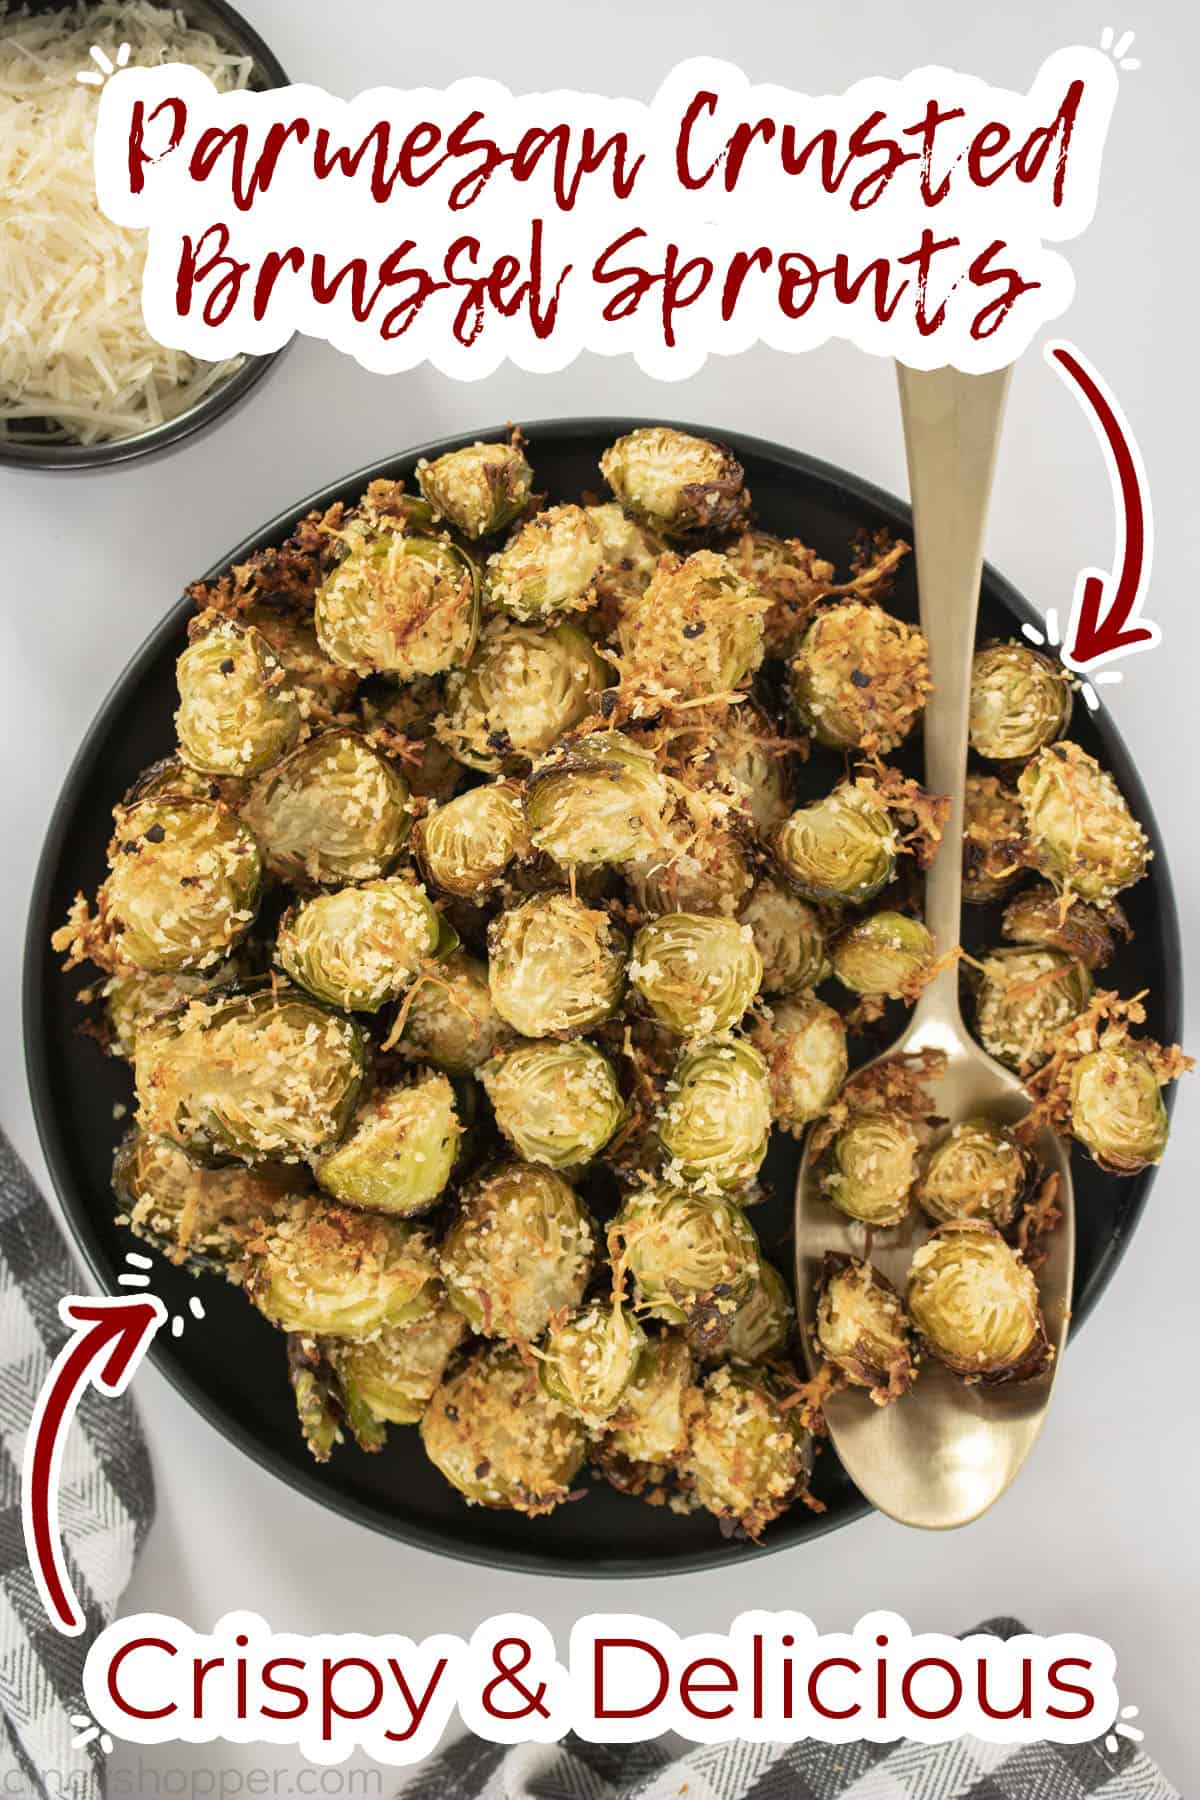 Text on image Parmesan Crusted Brussel Sprouts Crispy and Delicious